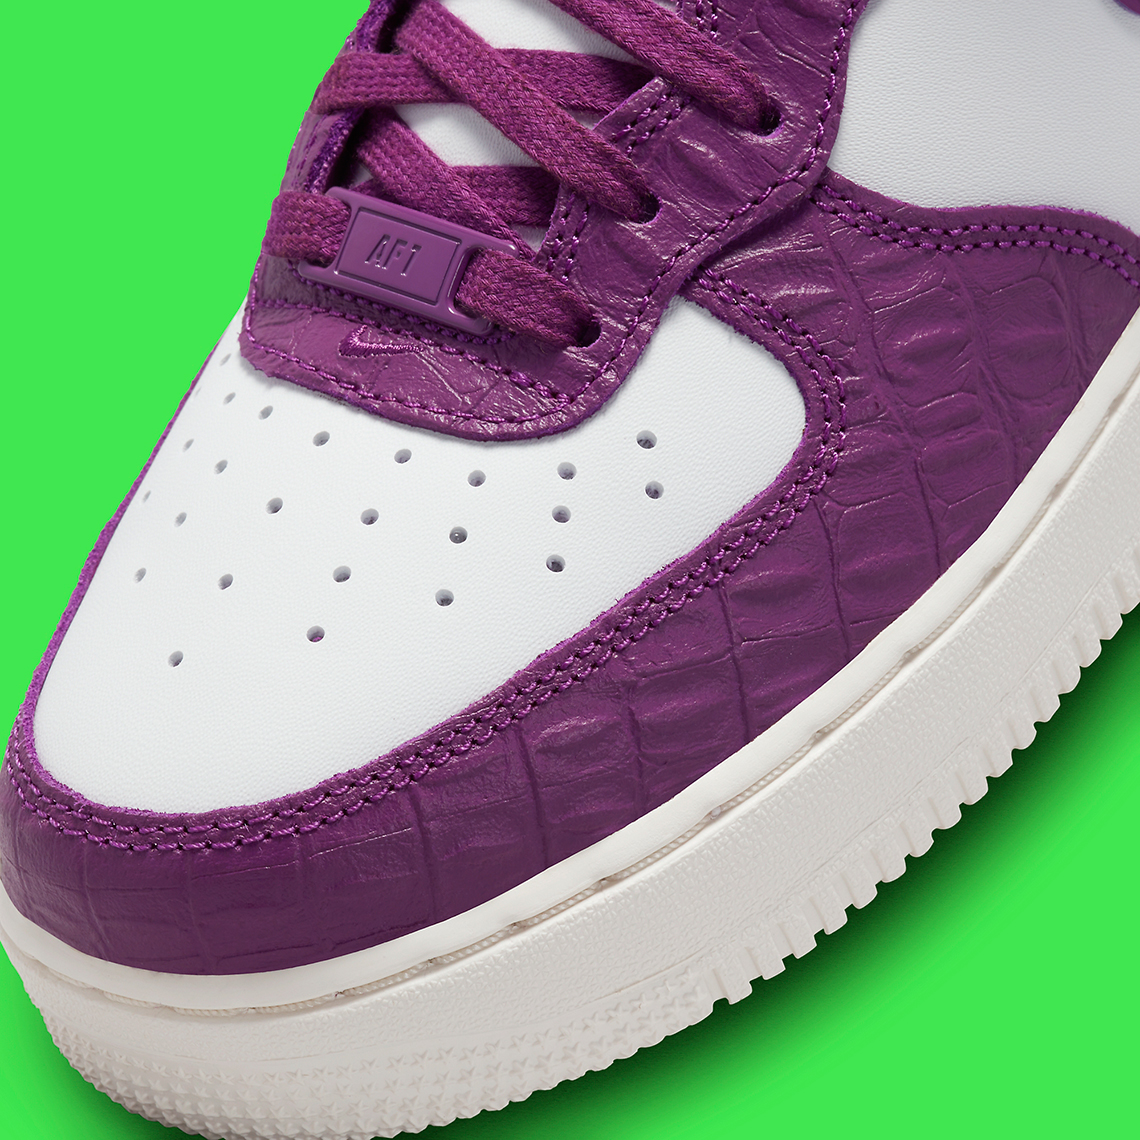 Nike Air Force 1s , Color Mauve, Size 10.5 for Sale in Yorktown